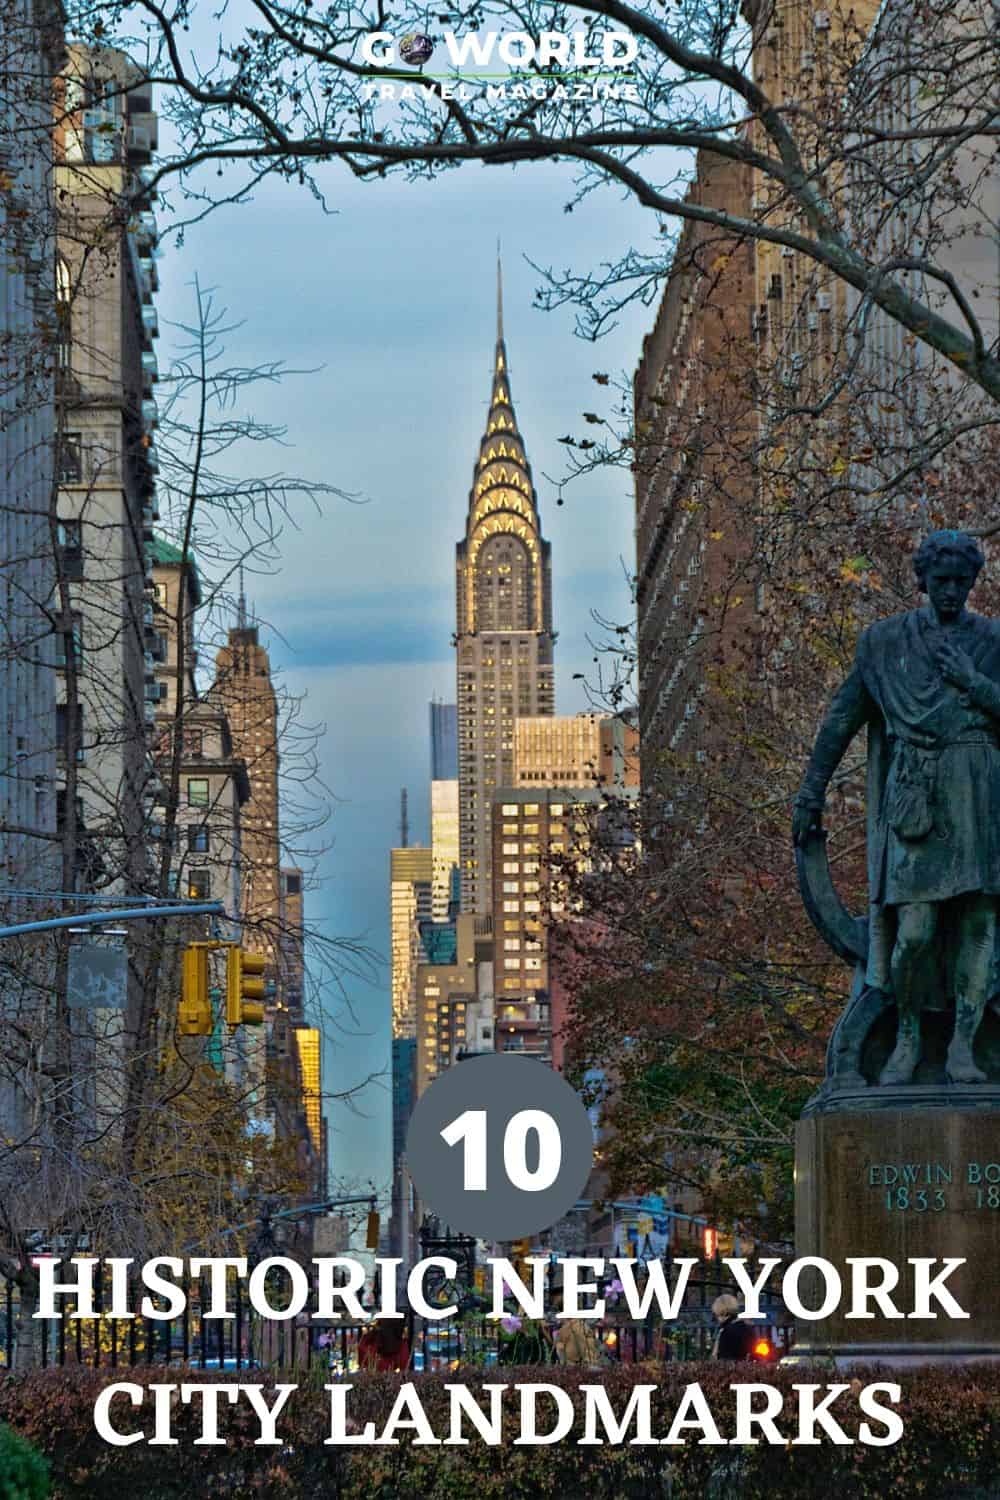 With Broadway and Times Square, NYC is an exciting place but it's also full of history. Here are the top historic New York City Landmarks. #NYC #NYCsights #Newyorkcitylandmarks